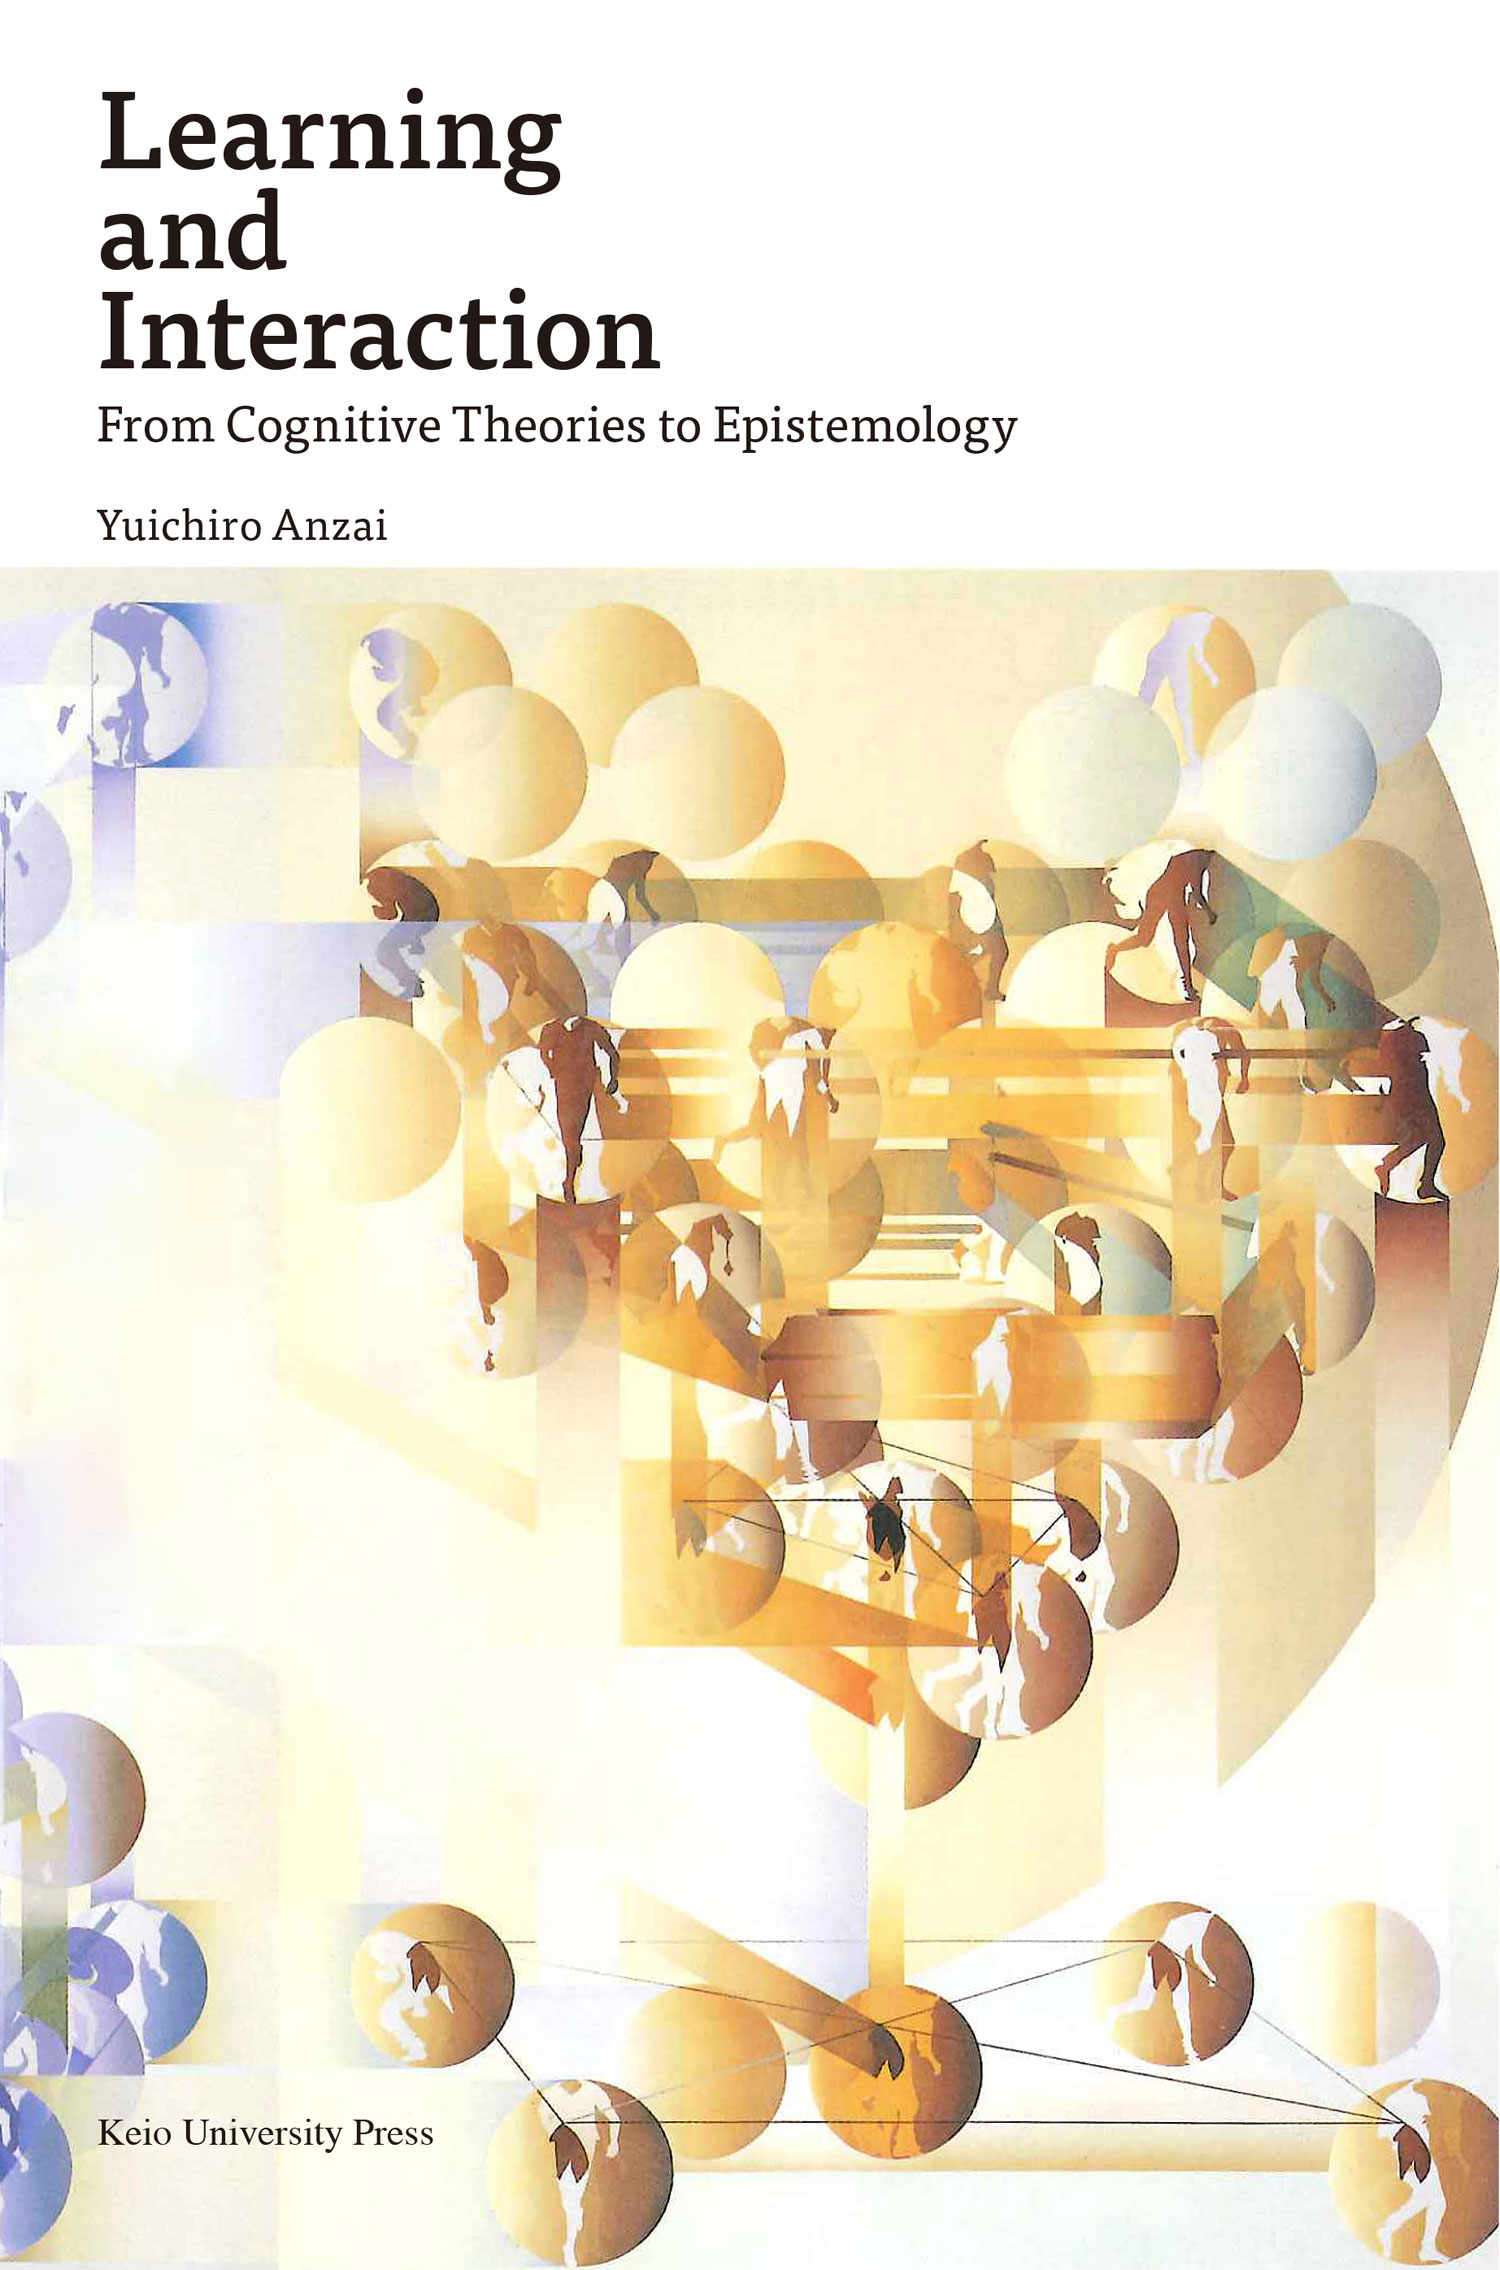 Learning and Interaction: From Cognitive Theories to Epistemology